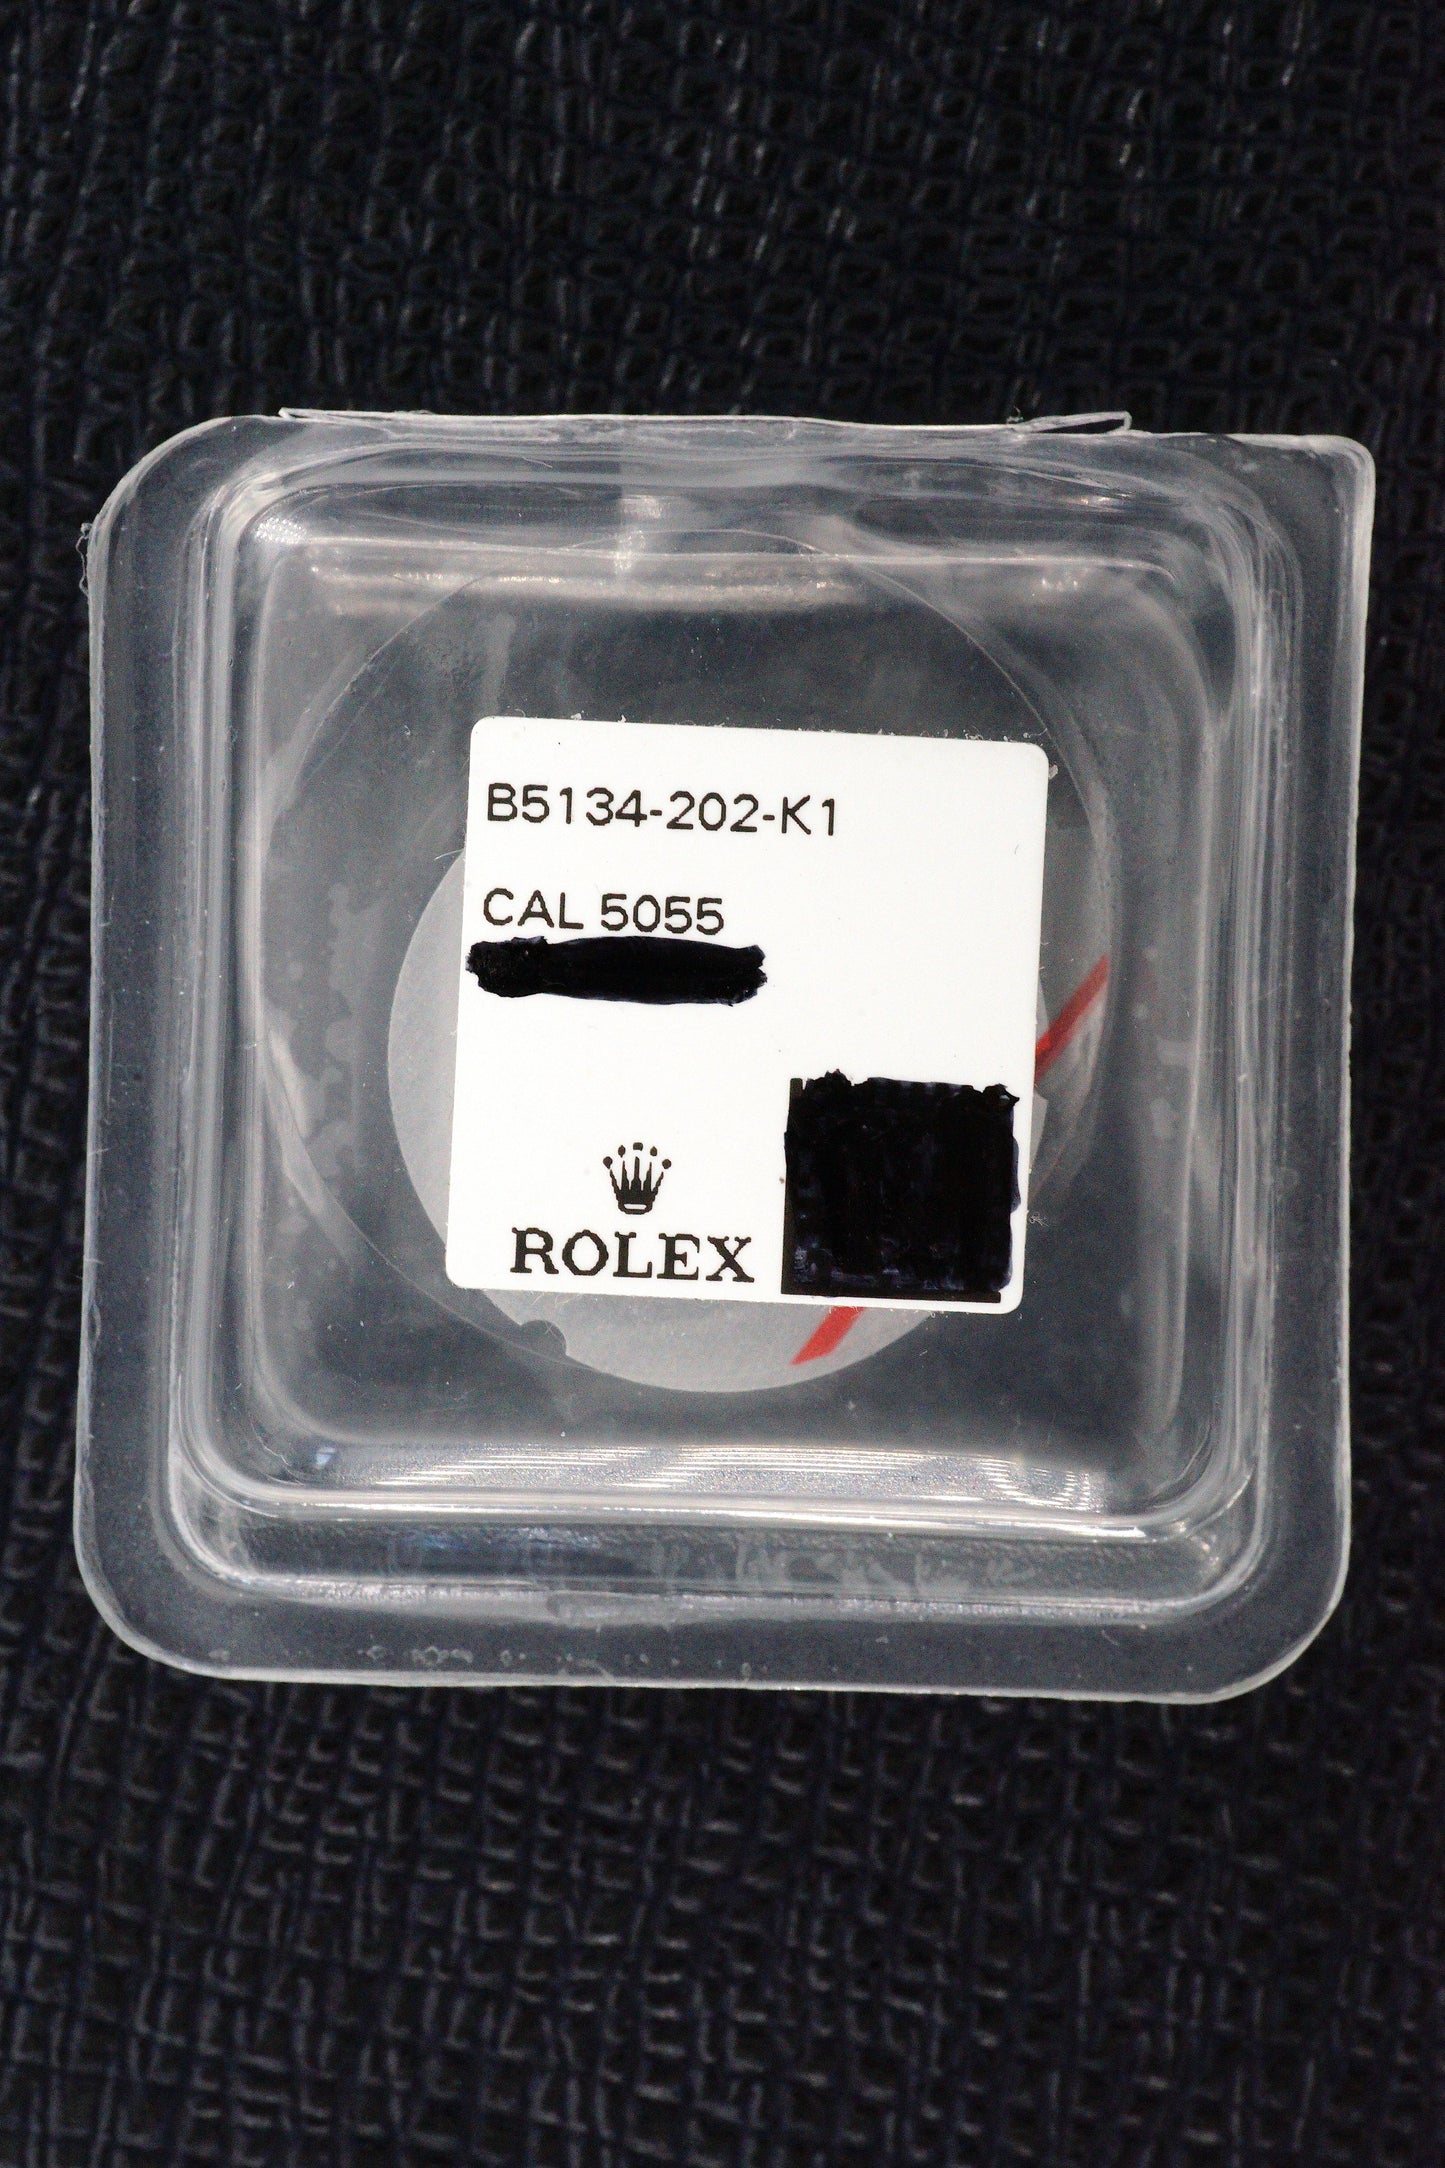 Rolex NOS Date Disc Day-Date 18039 | 18038 | 19018 | 19019 Chinese for Cal. 3055 & 5055 in blister